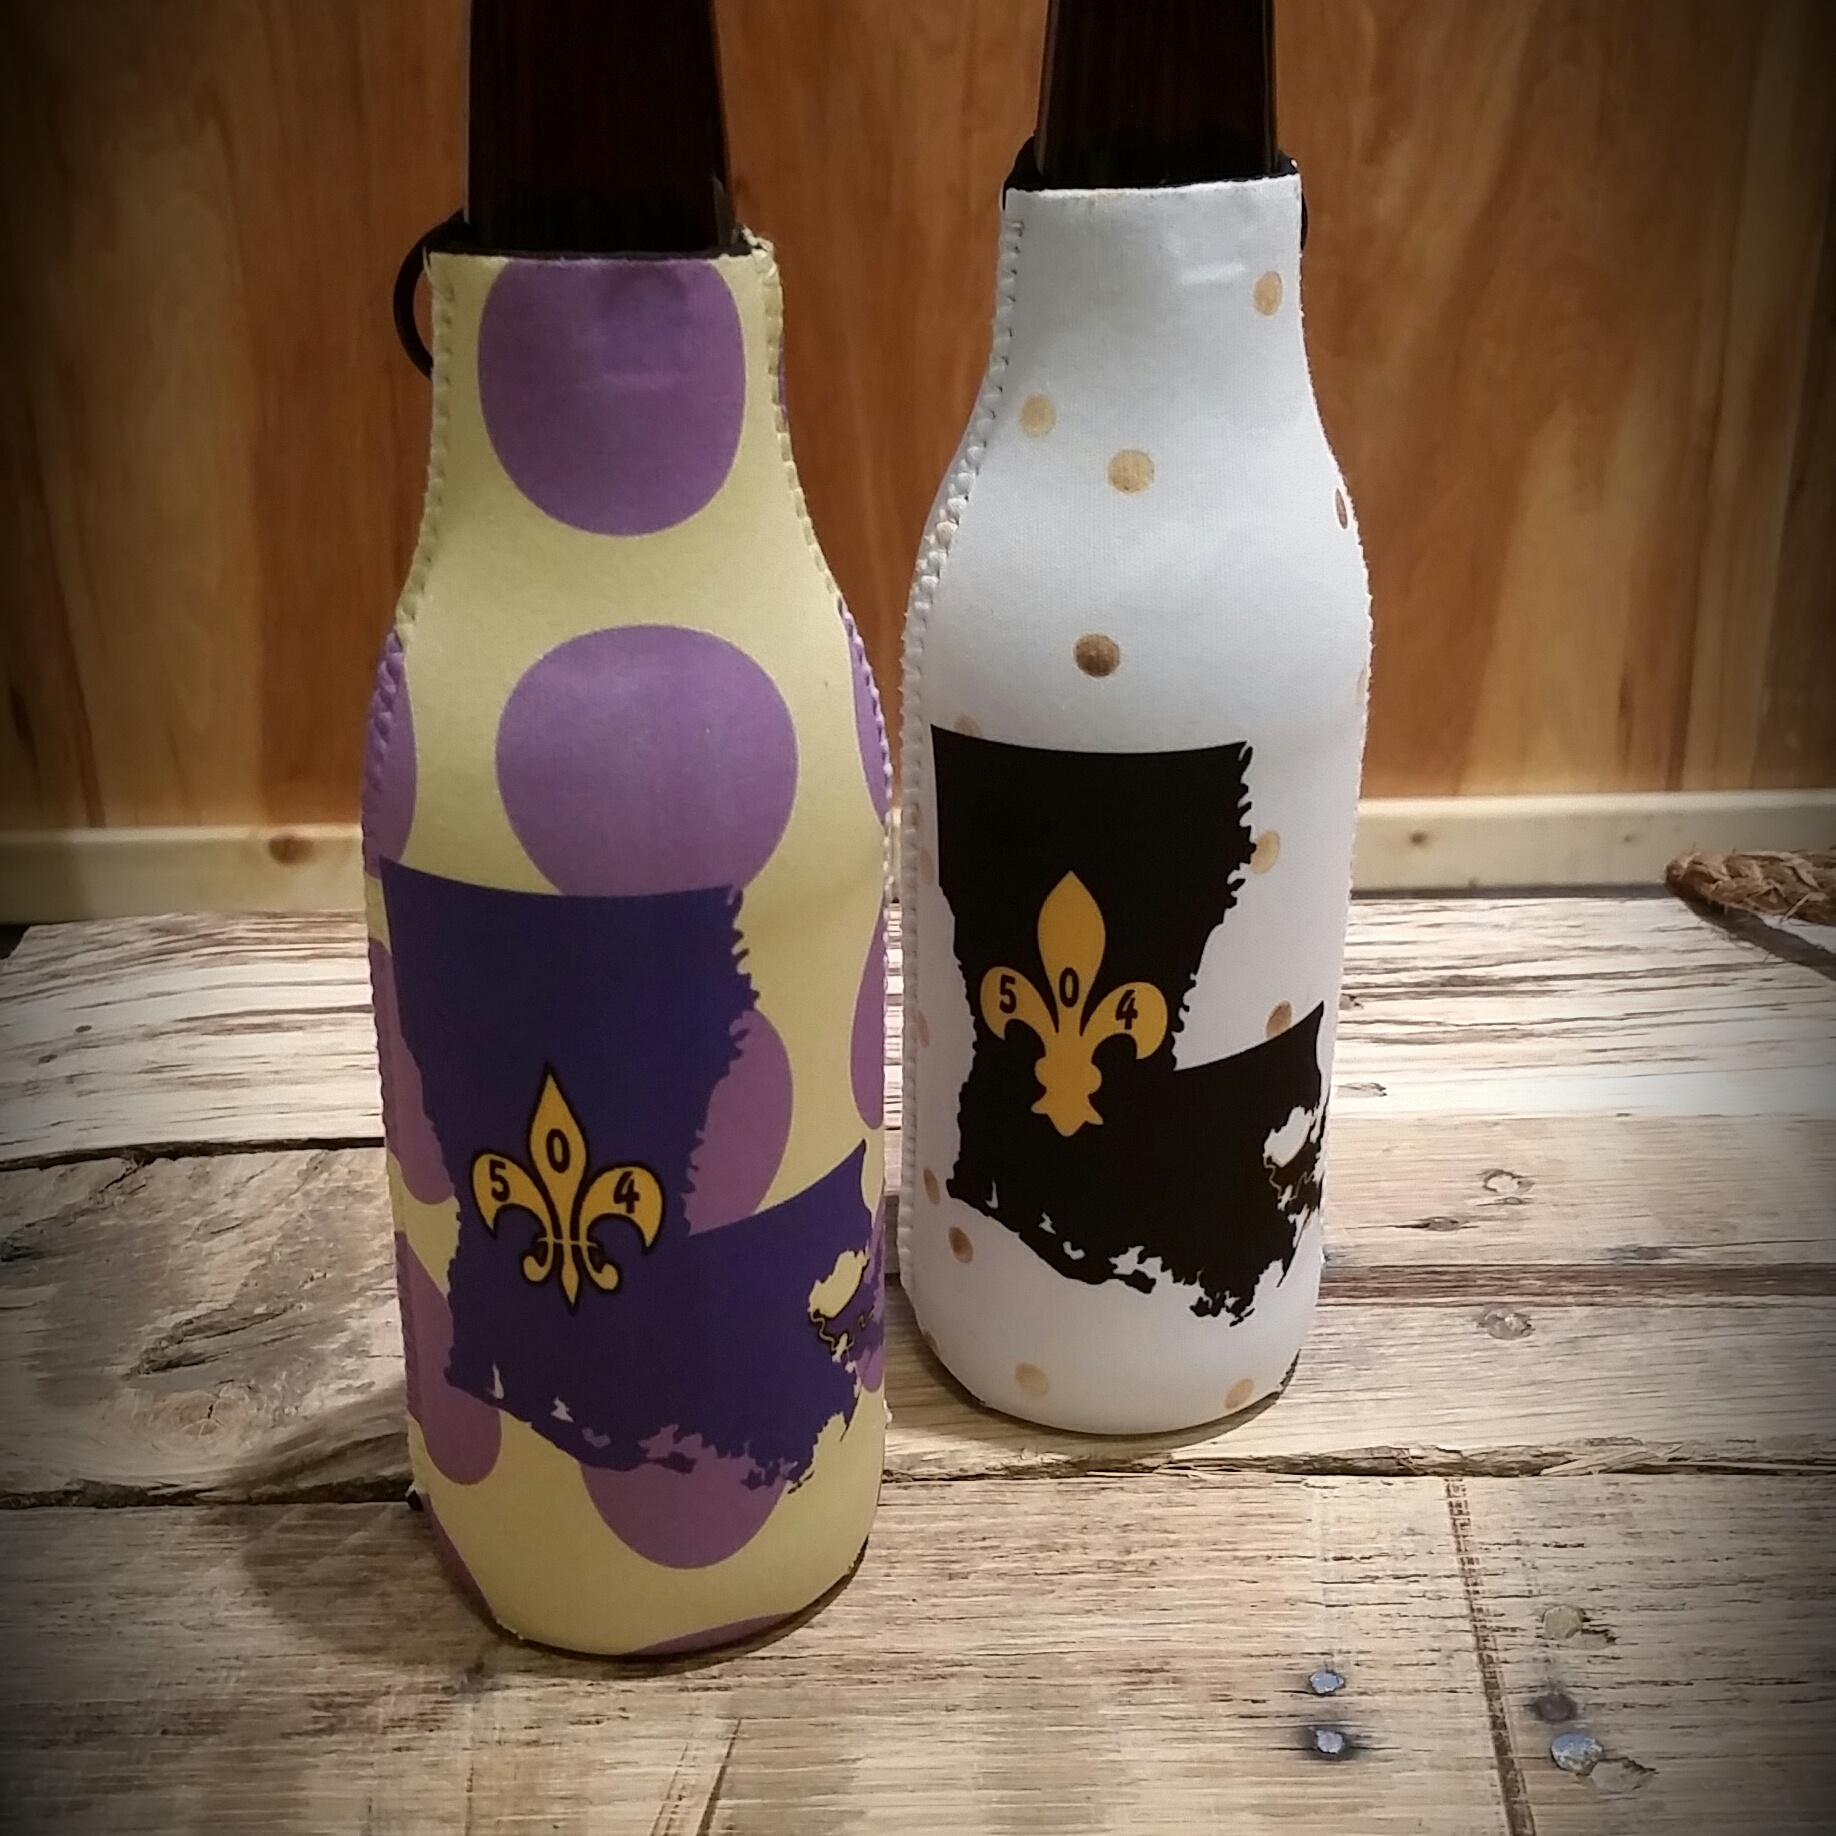 Zipper Koozies Geaux 504 made with sublimation printing